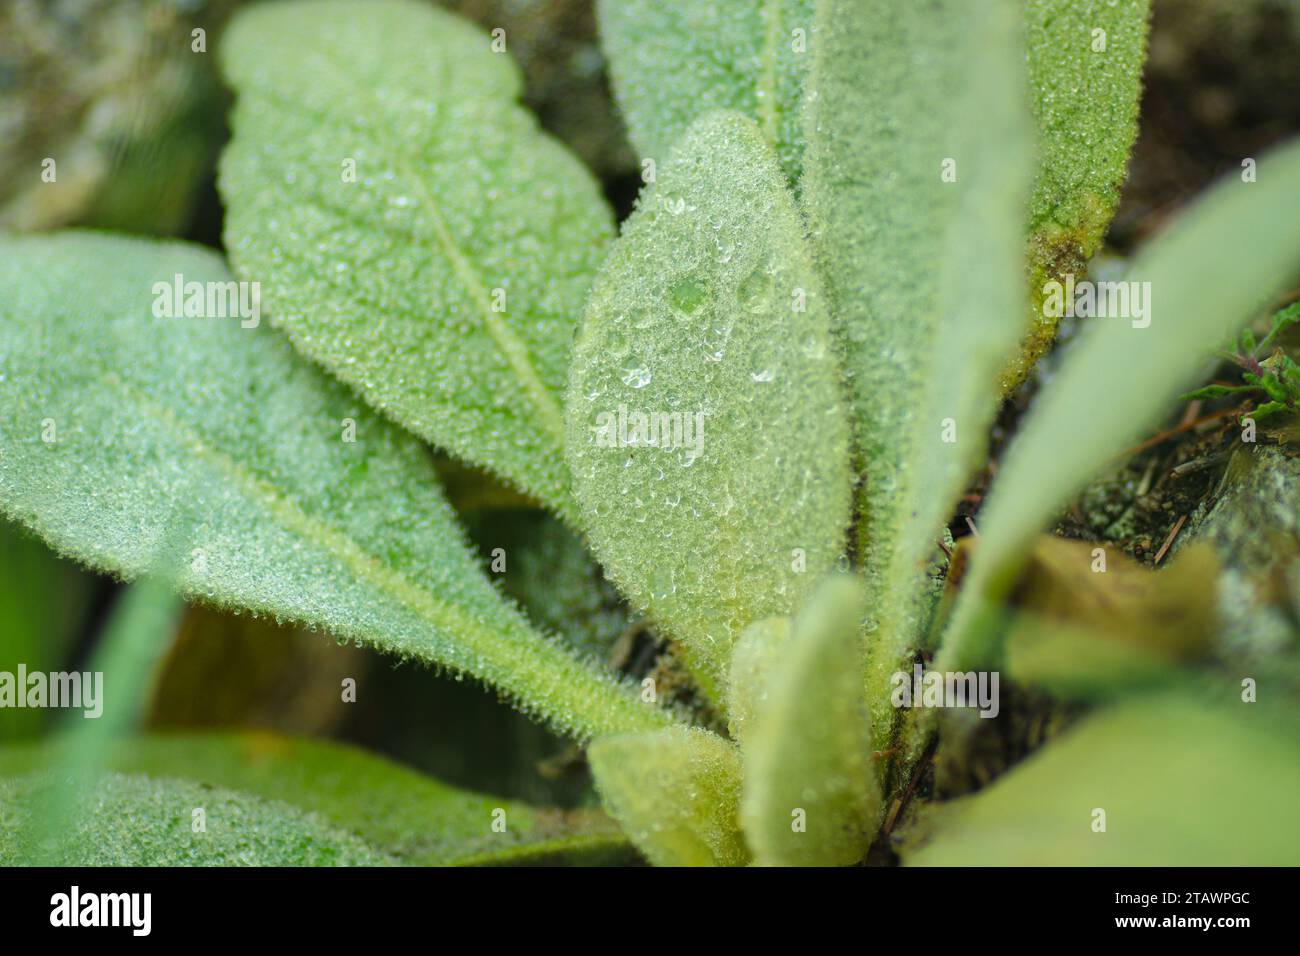 A close-up shot of green leaves with water droplets on them. Stock Photo